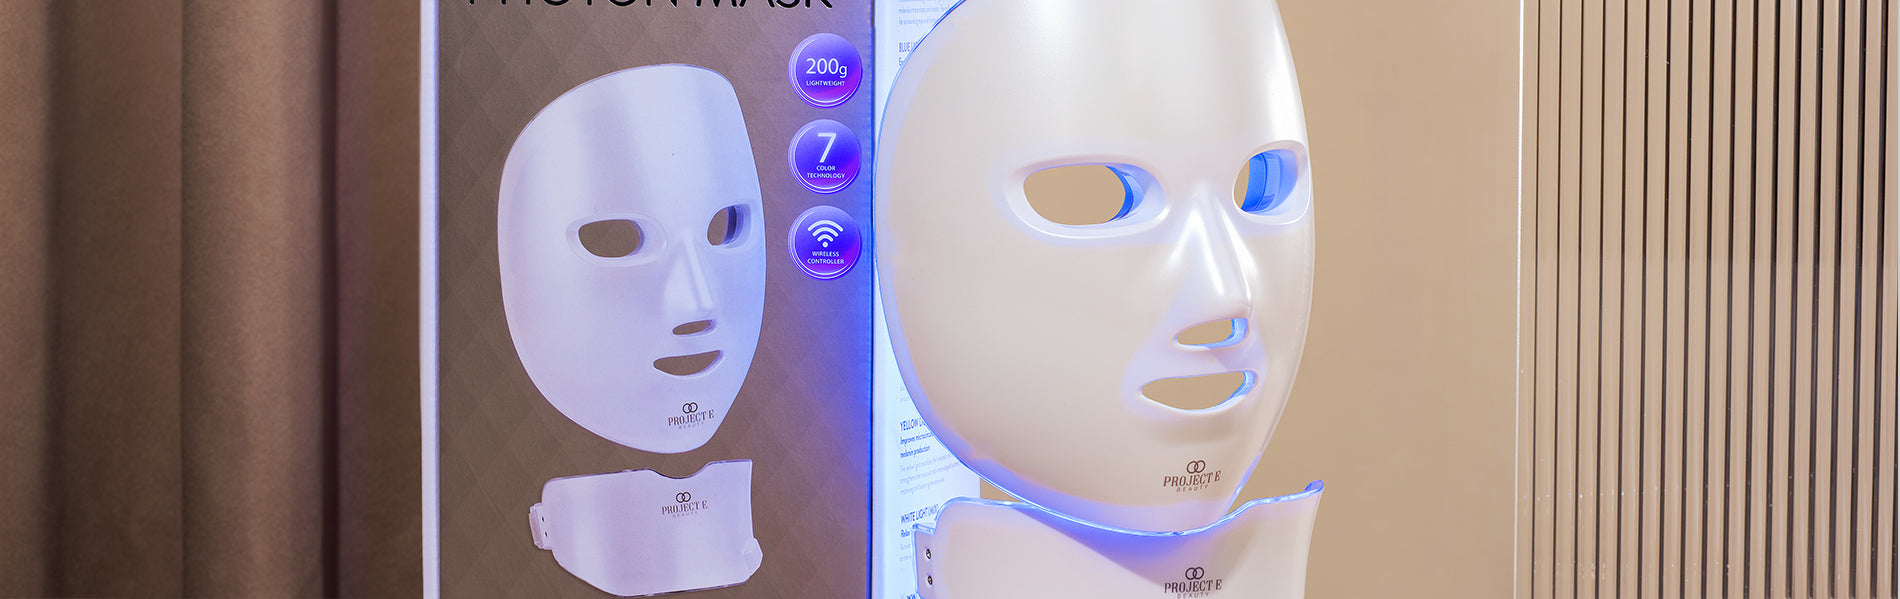 Does your skin really benefit from LED light therapy? Let’s find out.